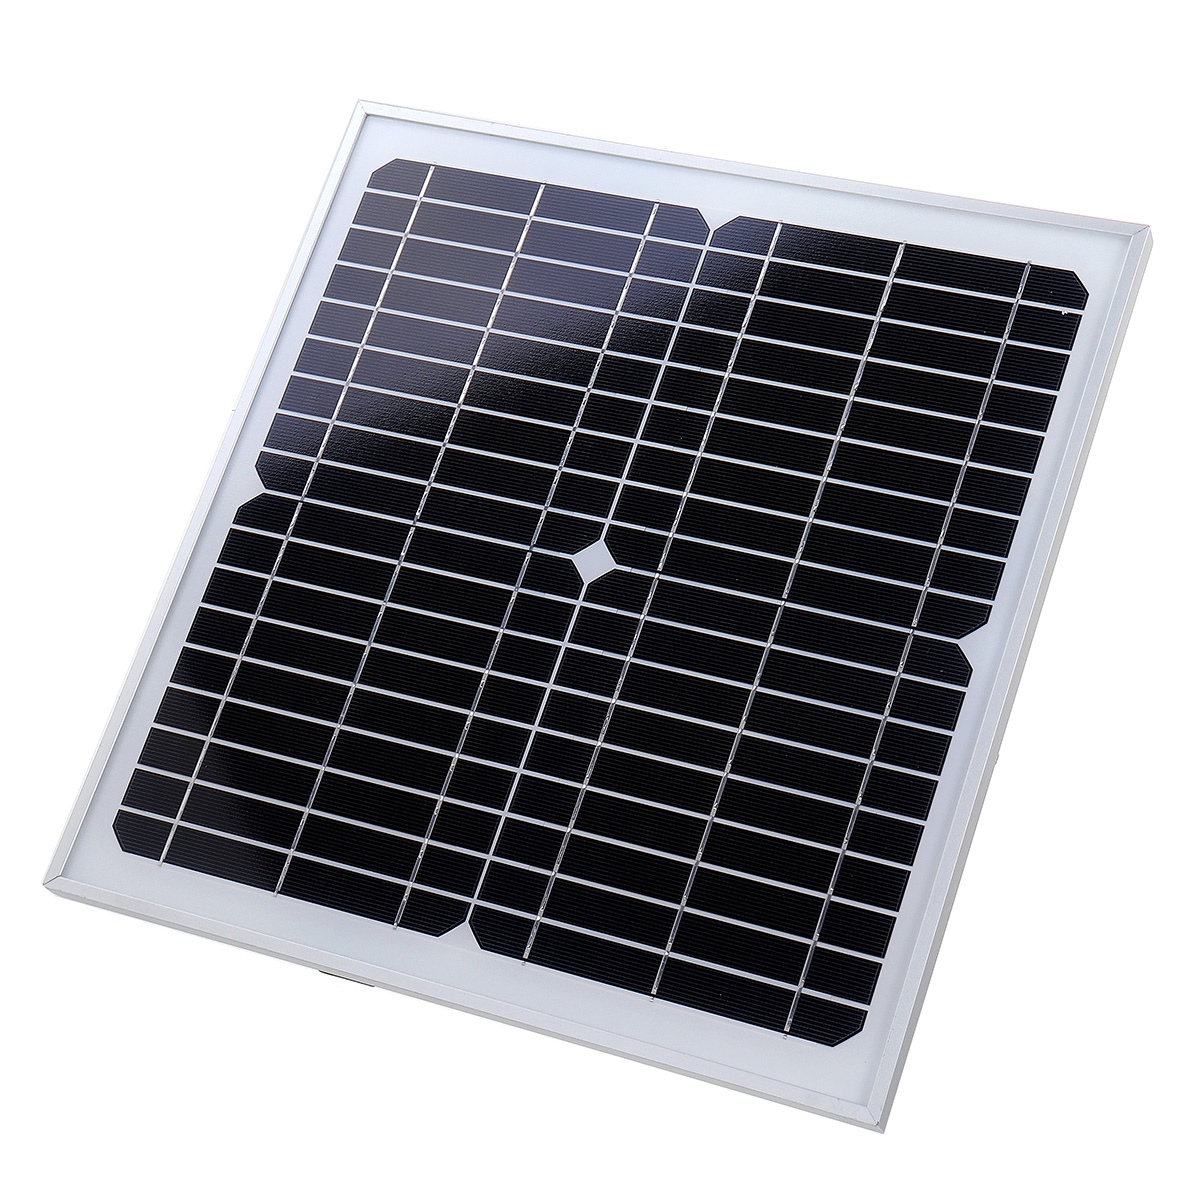 20W-Portable-Solar-Panel-USB-Battery-Charger-w-10A-Solar-Controller-For-Camping-Travelling-Phone-Cha-1476907-3